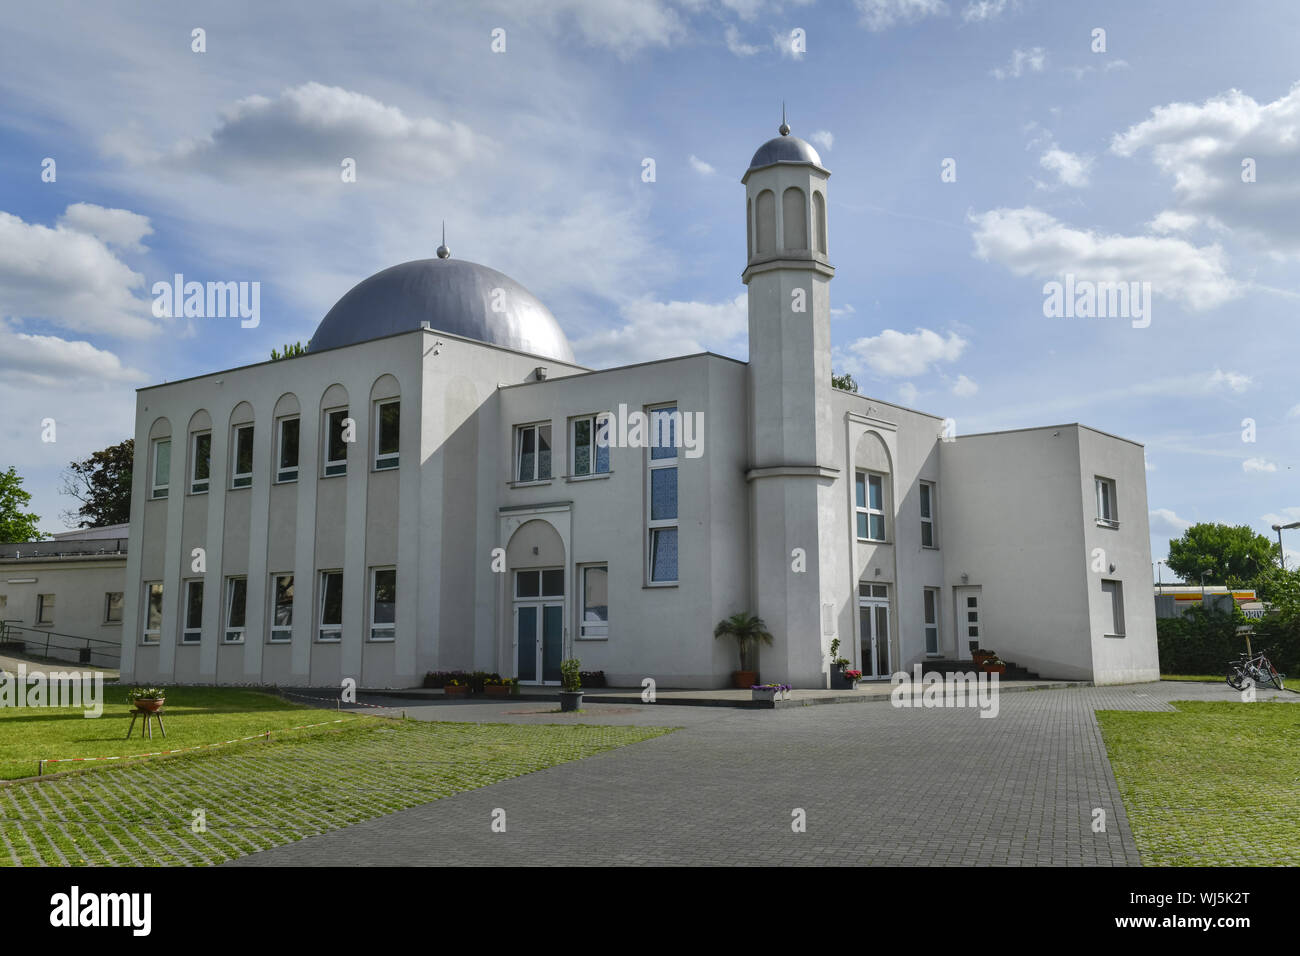 View, architecture, Outside, Outside, outside view, outside view, Berlin, Germany, building, building, church, Islam, Islamic, Islamic, more Islamic, Stock Photo